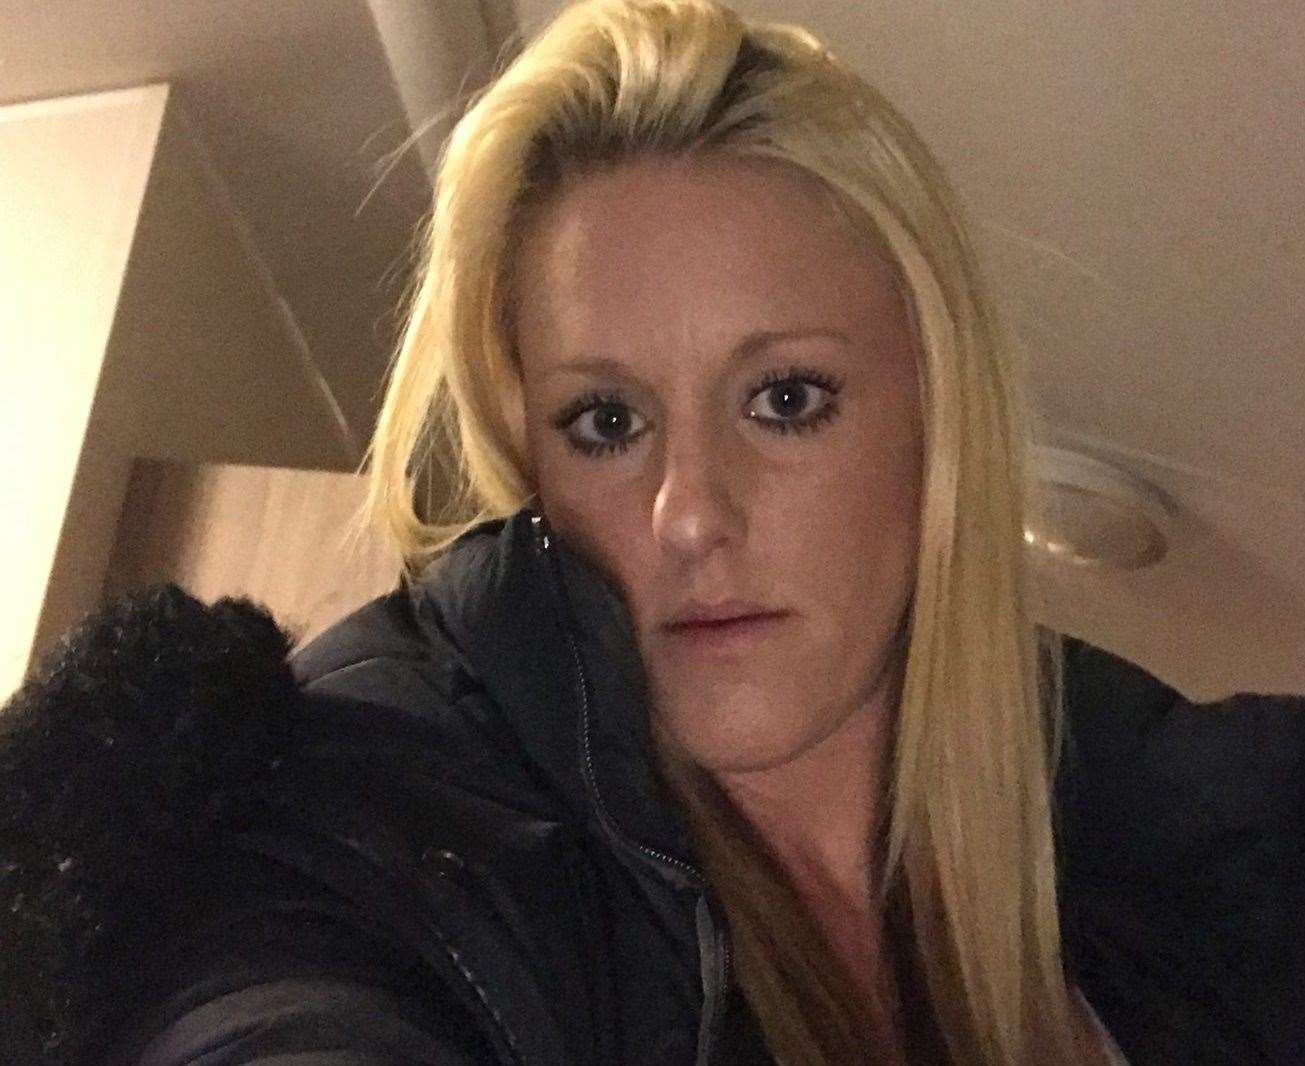 Crystal Reynolds, 36, said she'd been given a cannabis brownie at a weekend barbecue